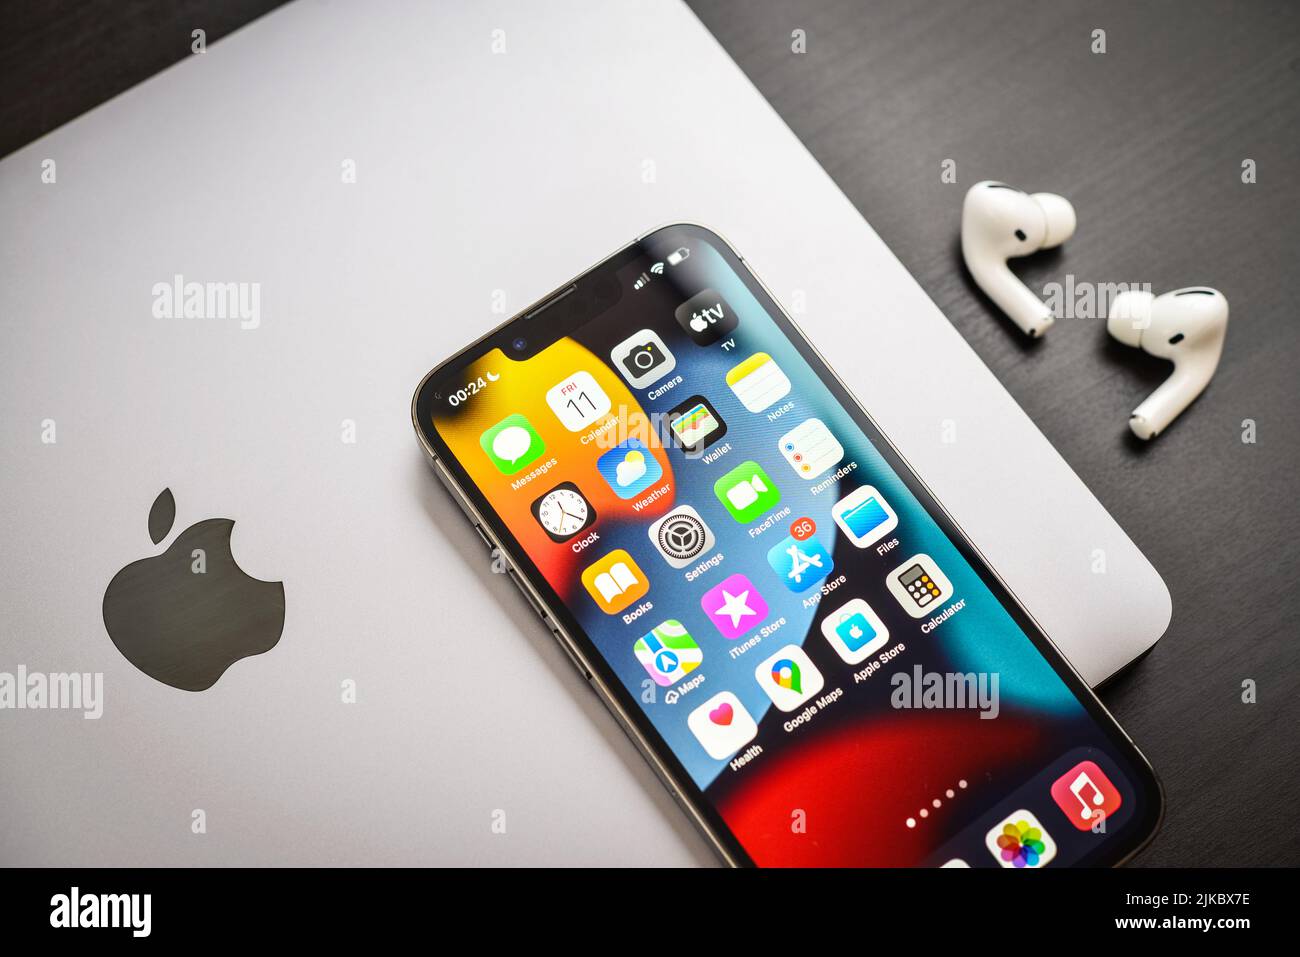 KIEV, UKRAINE - FEBRUARY 10, 2022: Apple product. MacBook Pro, iPhone 13 Pro with AirPods Pro headphones on a black background top view. Technology ga Stock Photo